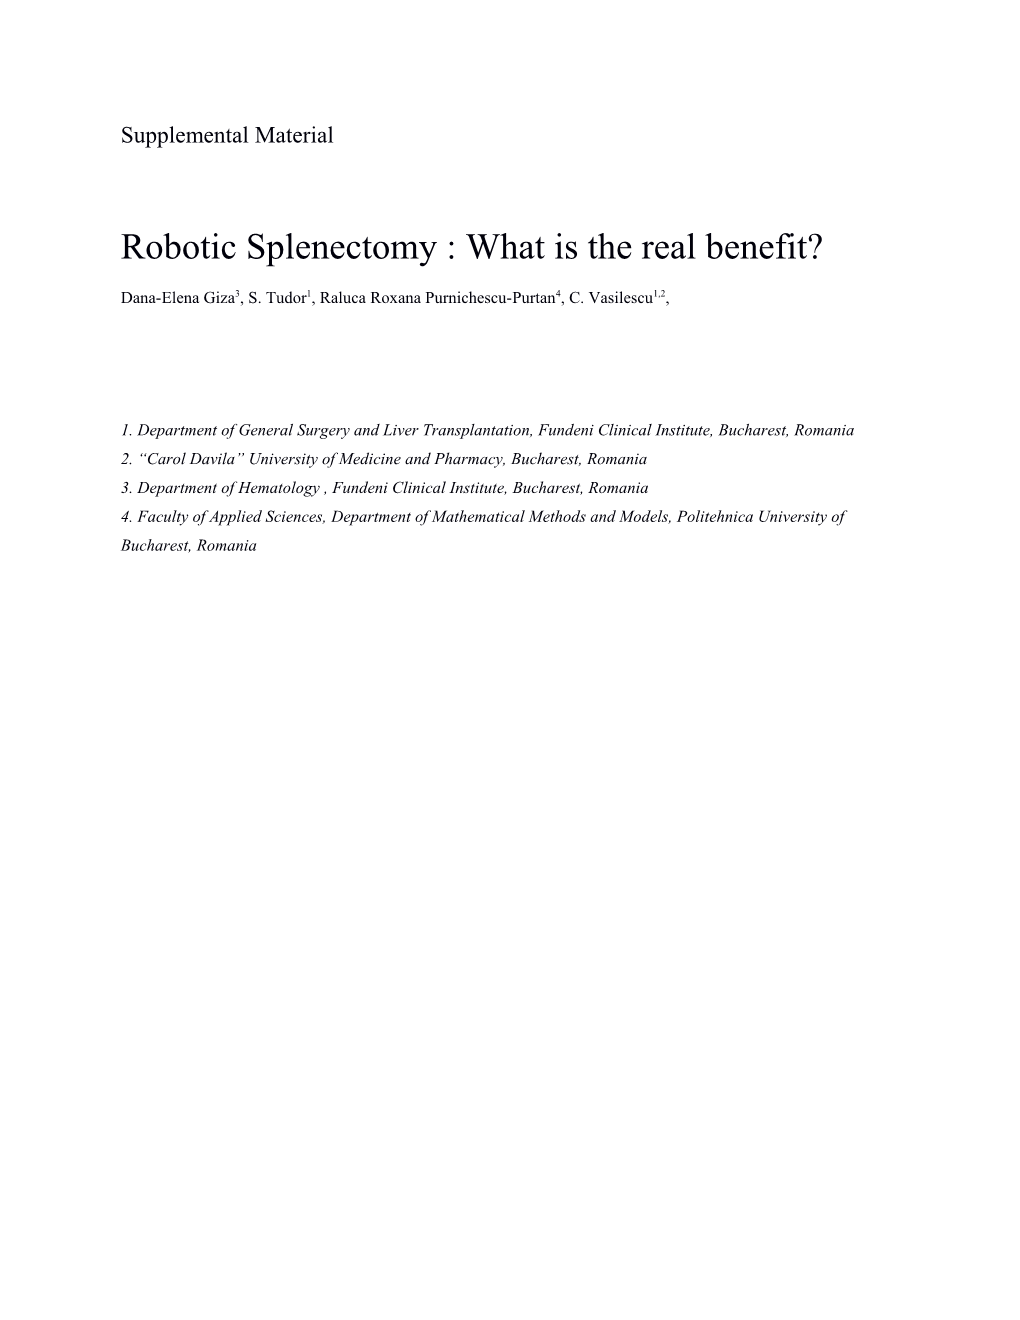 Robotic Splenectomy : What Is the Real Benefit?